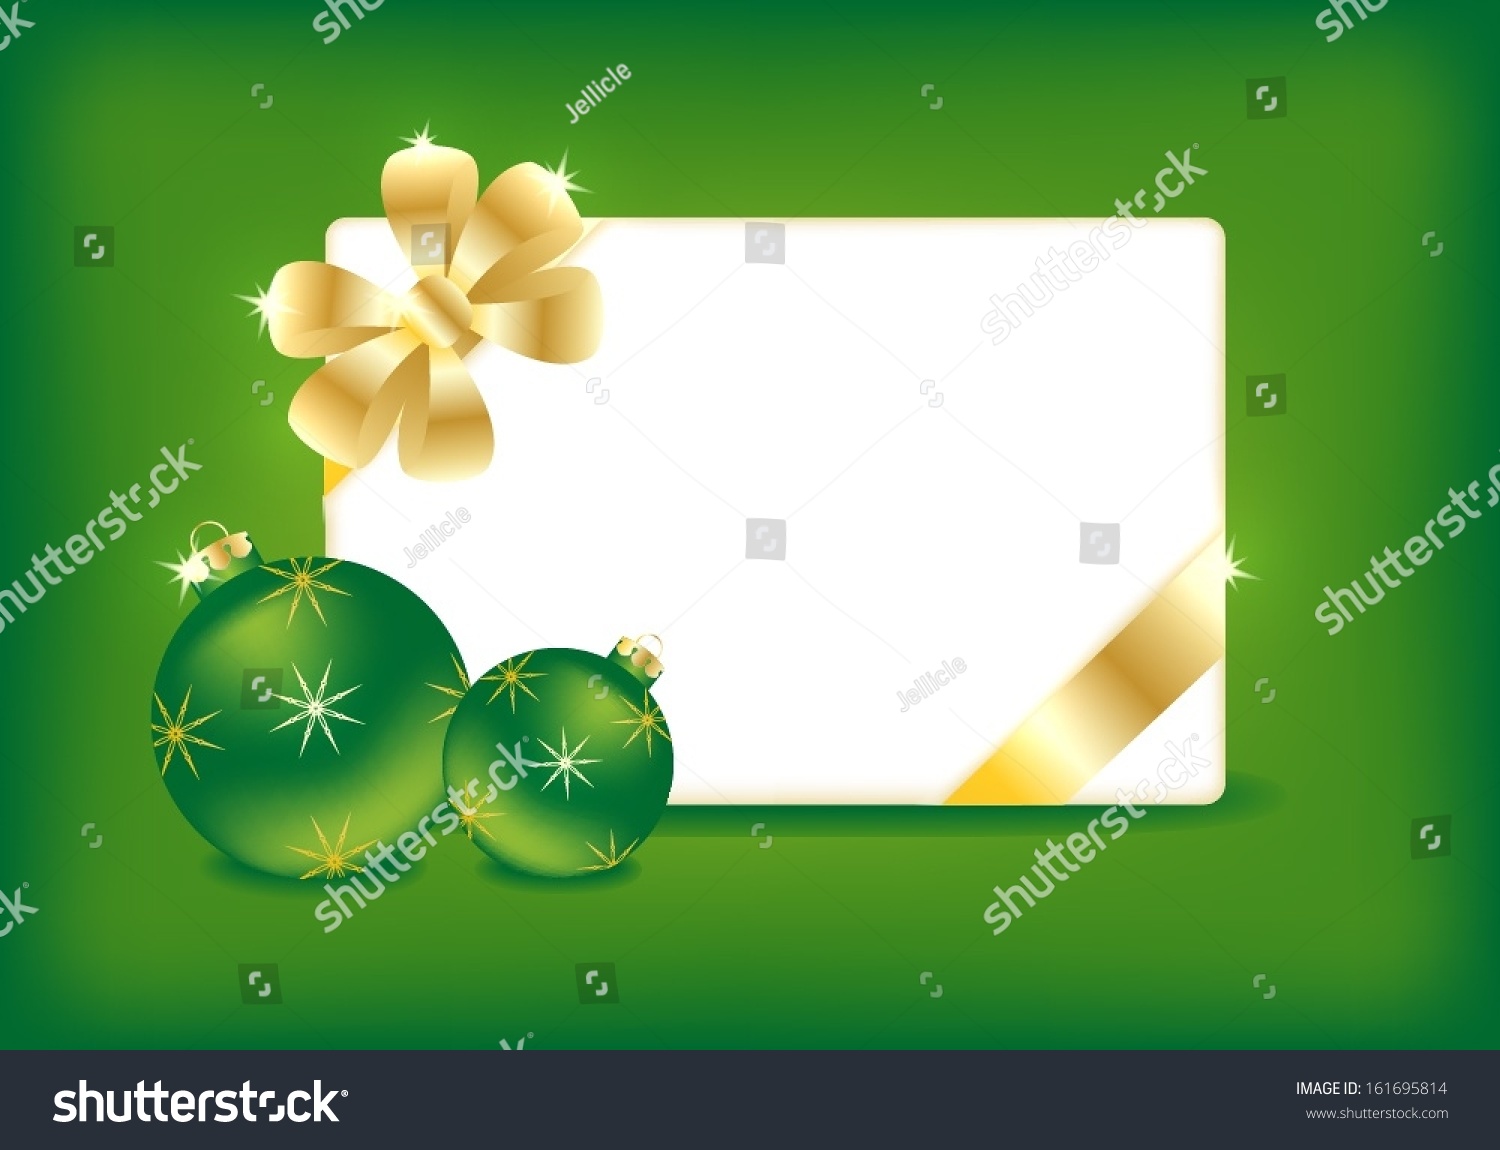 Christmas Balls And Blank Invitation Card Over Green Background Stock ...